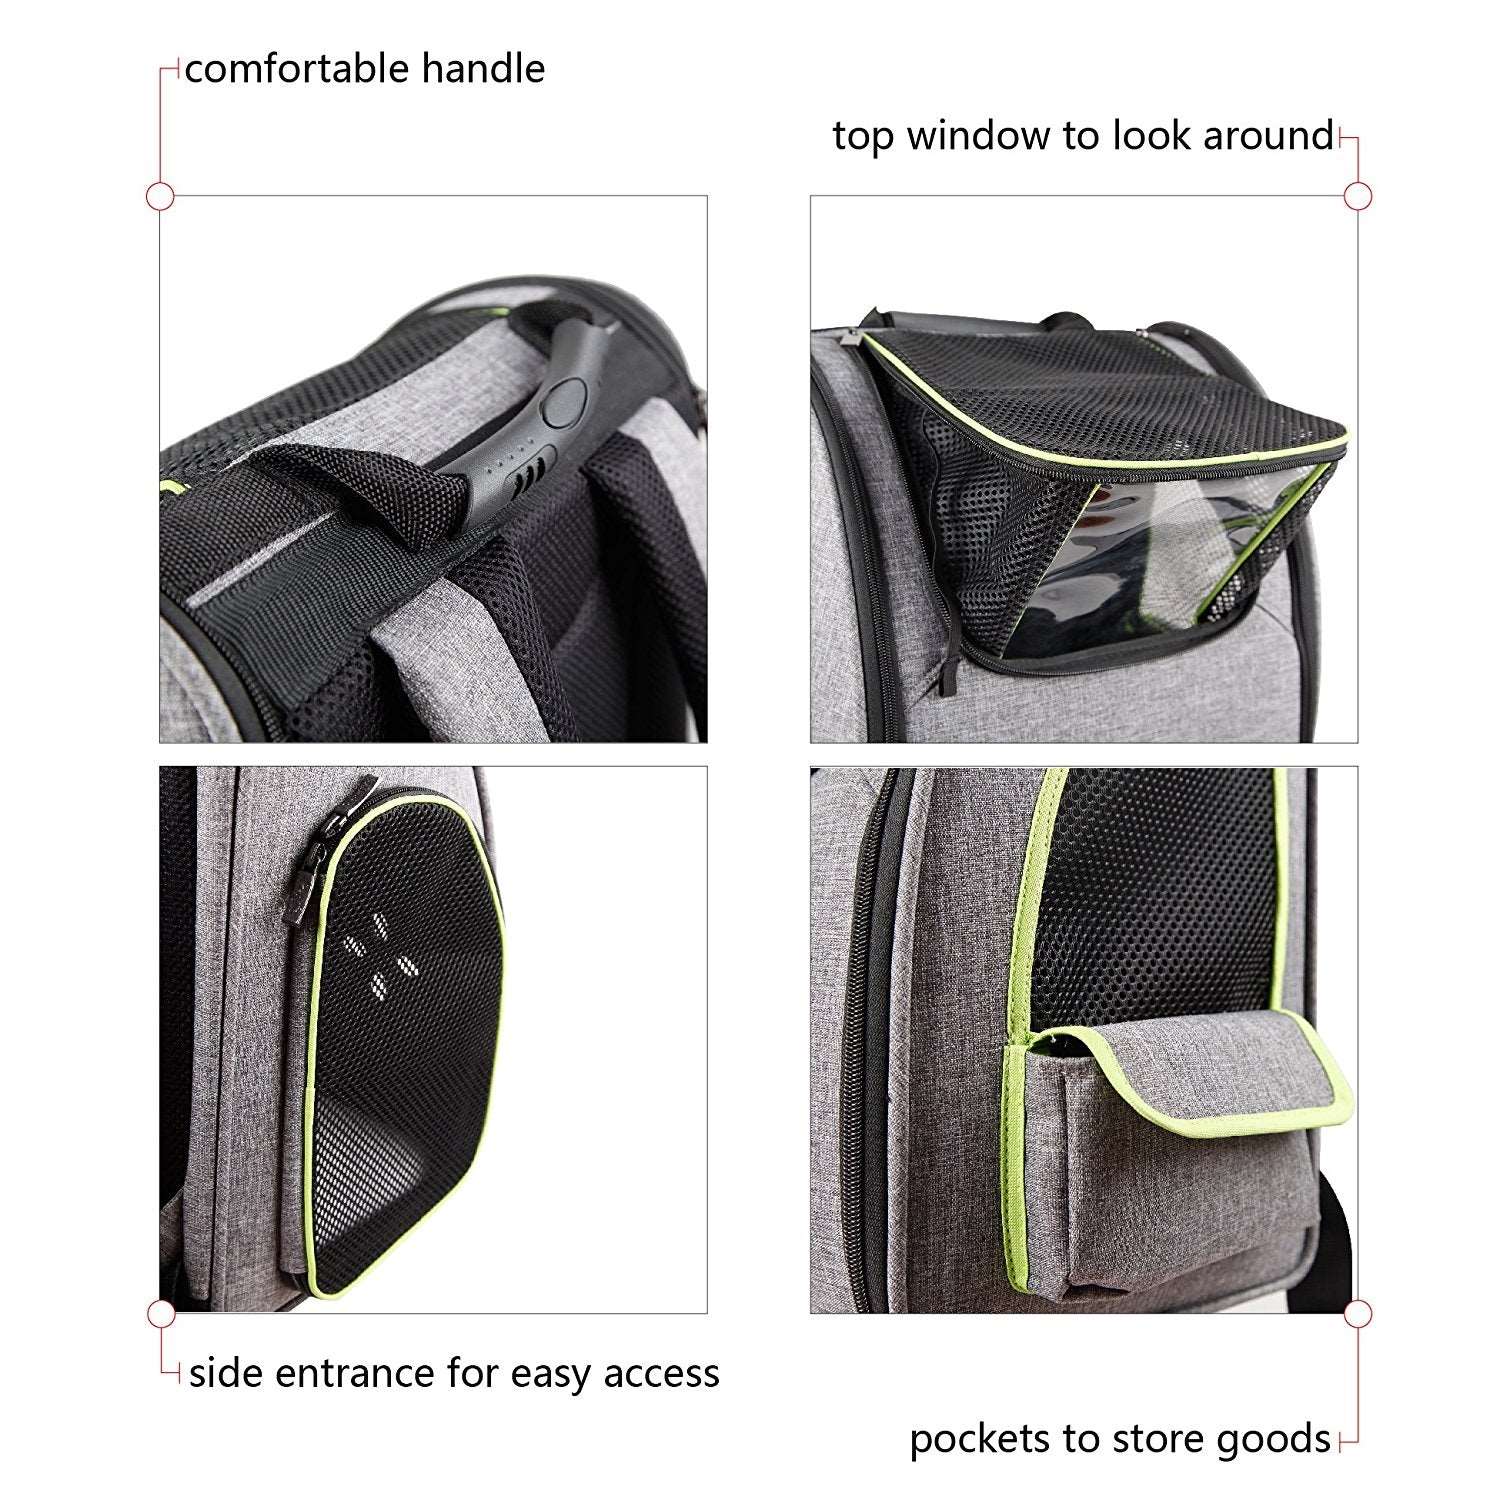 Petsfit-Cat-and-Dog-Backpack-Carrier-Soft-Side-with-Good-Ventilation-07